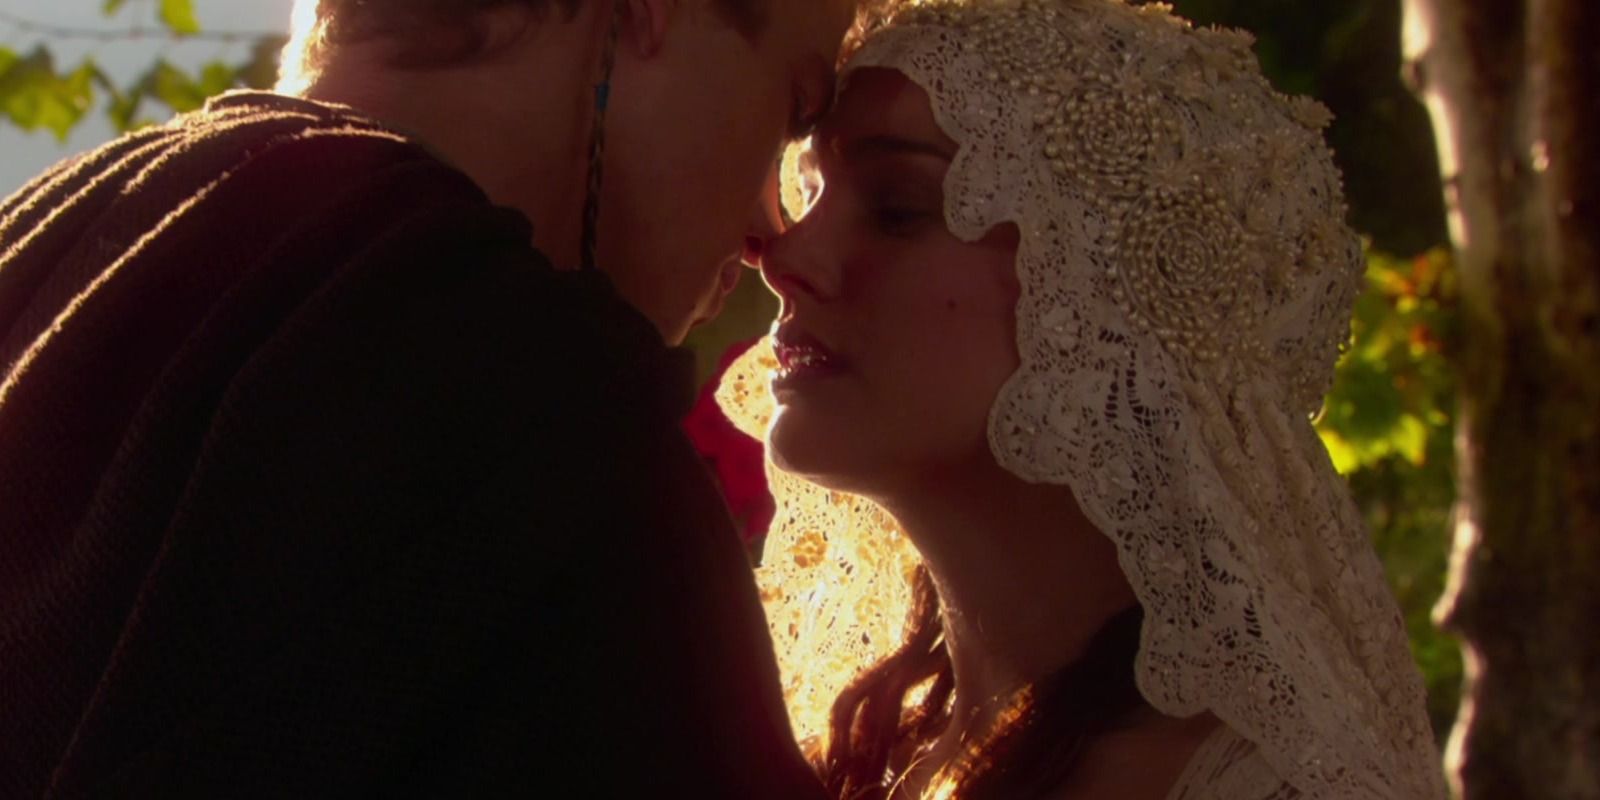 Padme and Anakin getting married about to kiss in Star Wars: Episode II - Attack of the Clones